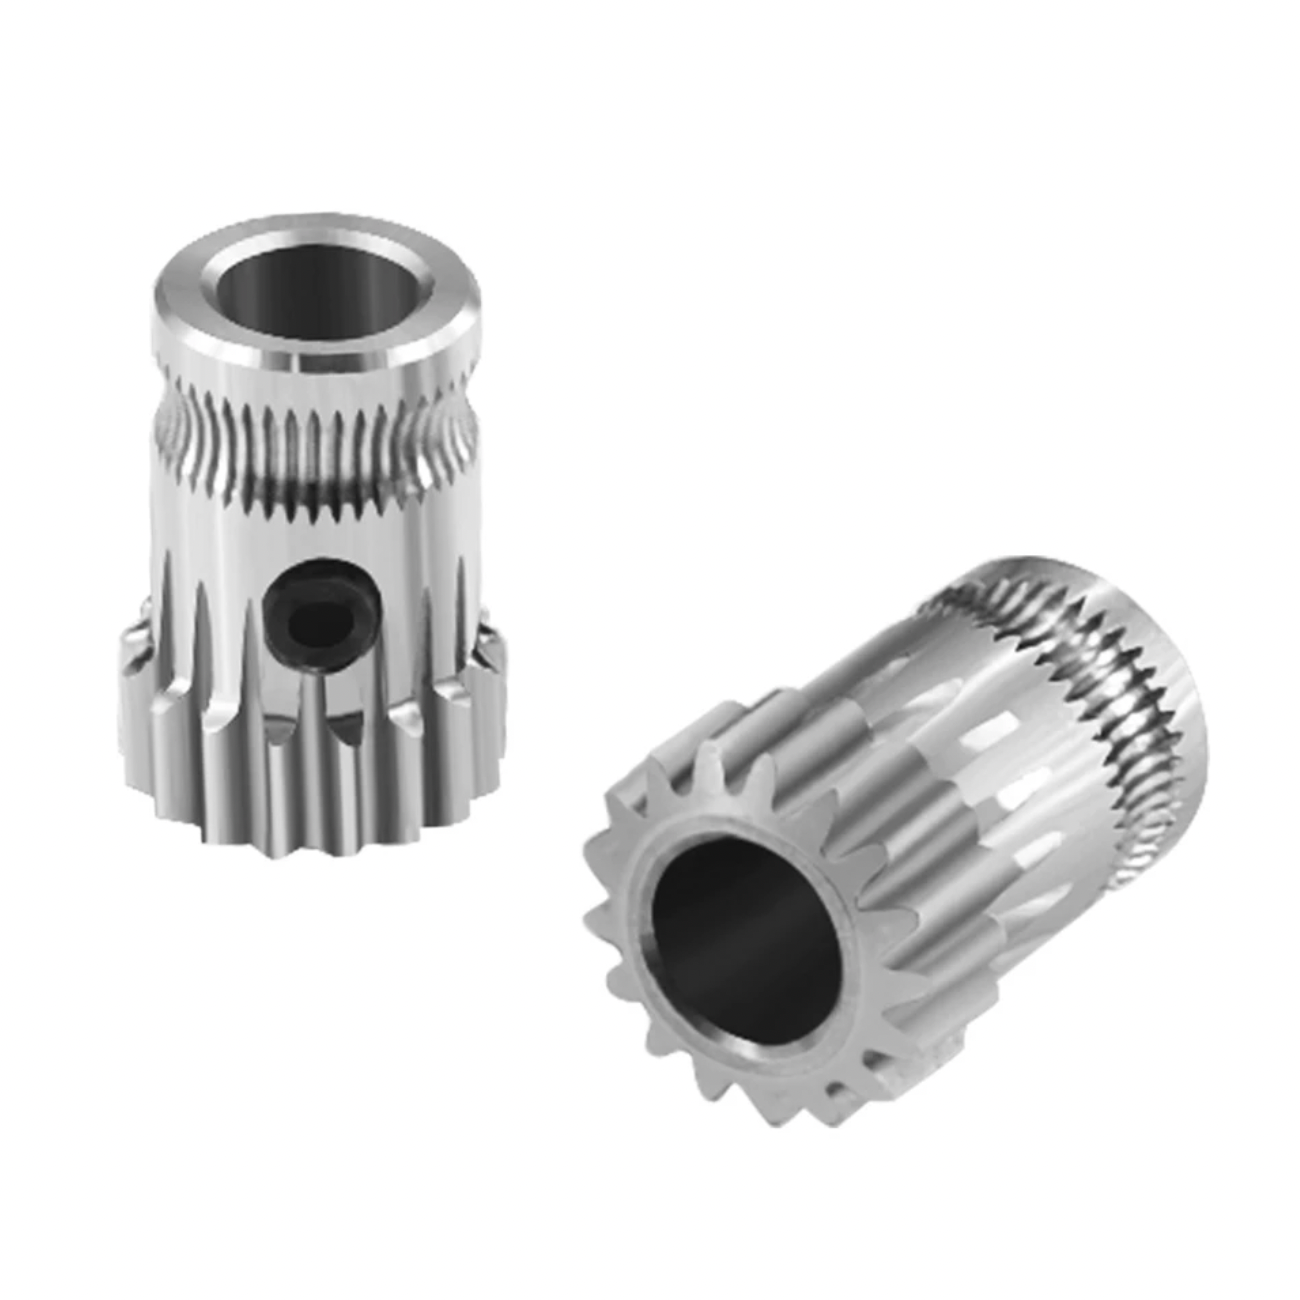  Dual Gear Drive Extruder Upgrade for Creality Ender 3, Ender 5 & CR10